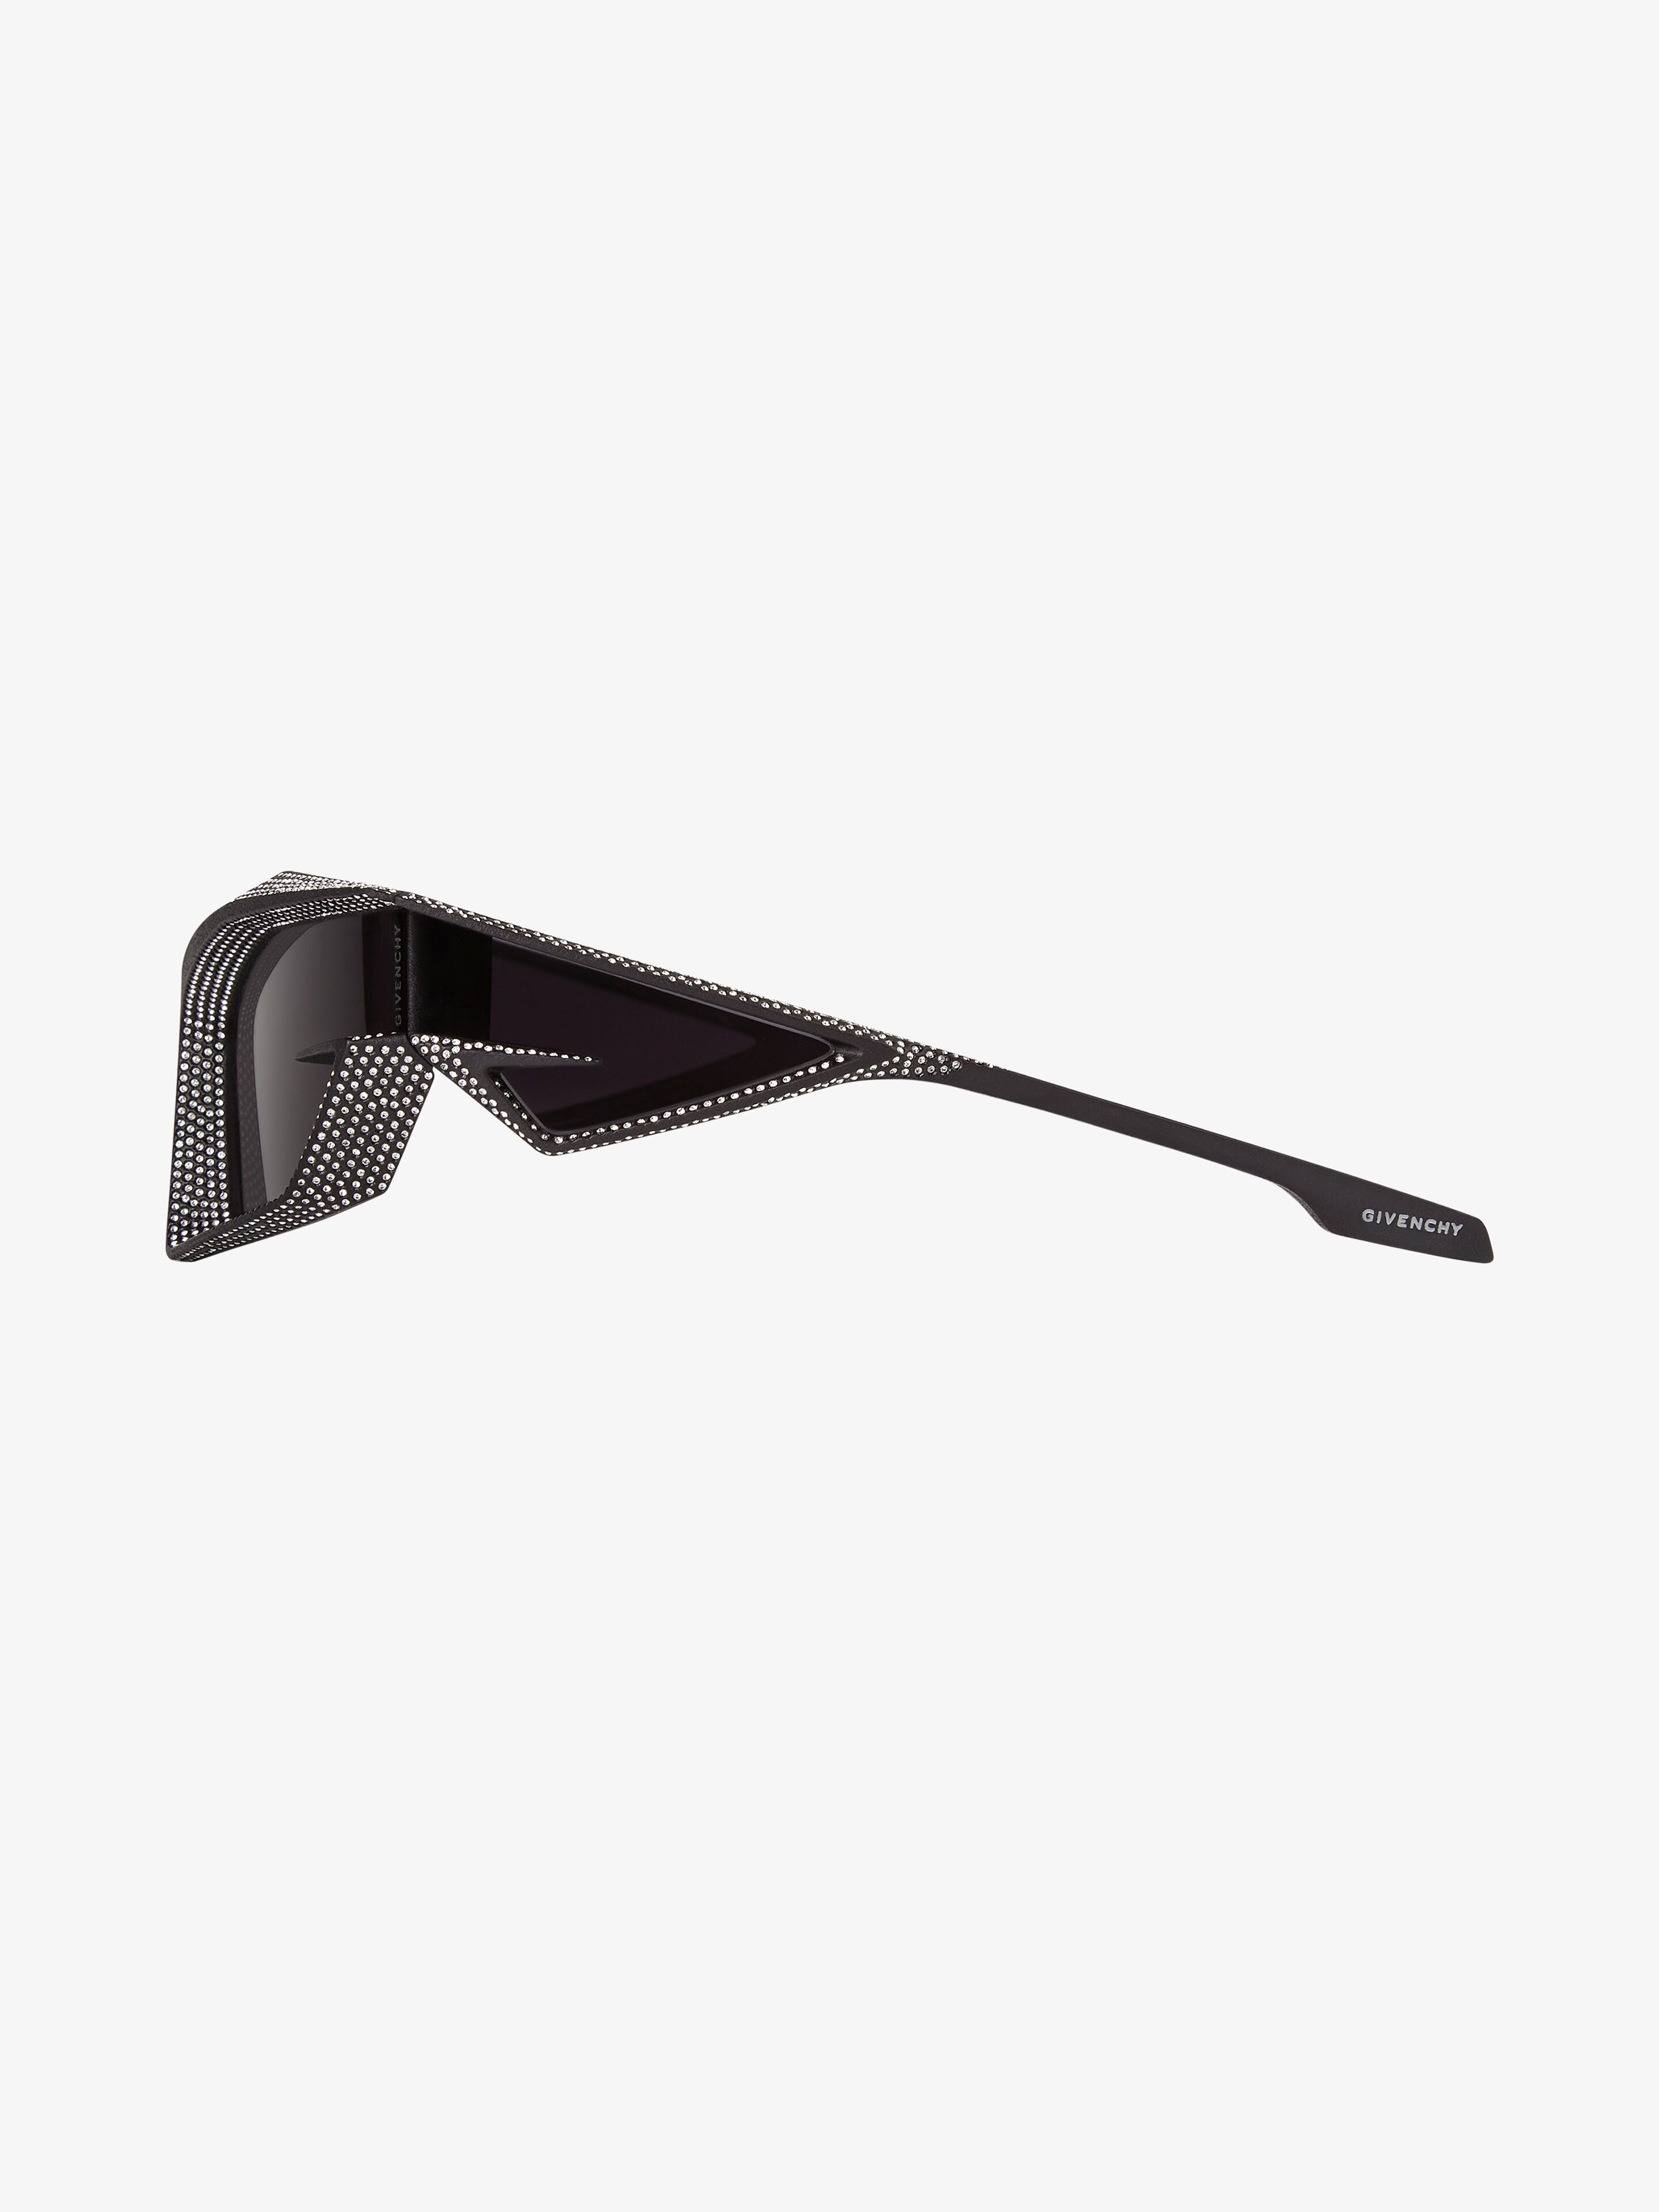 GIV CUT UNISEX SUNGLASSES IN METAL WITH CRYSTALS - 6